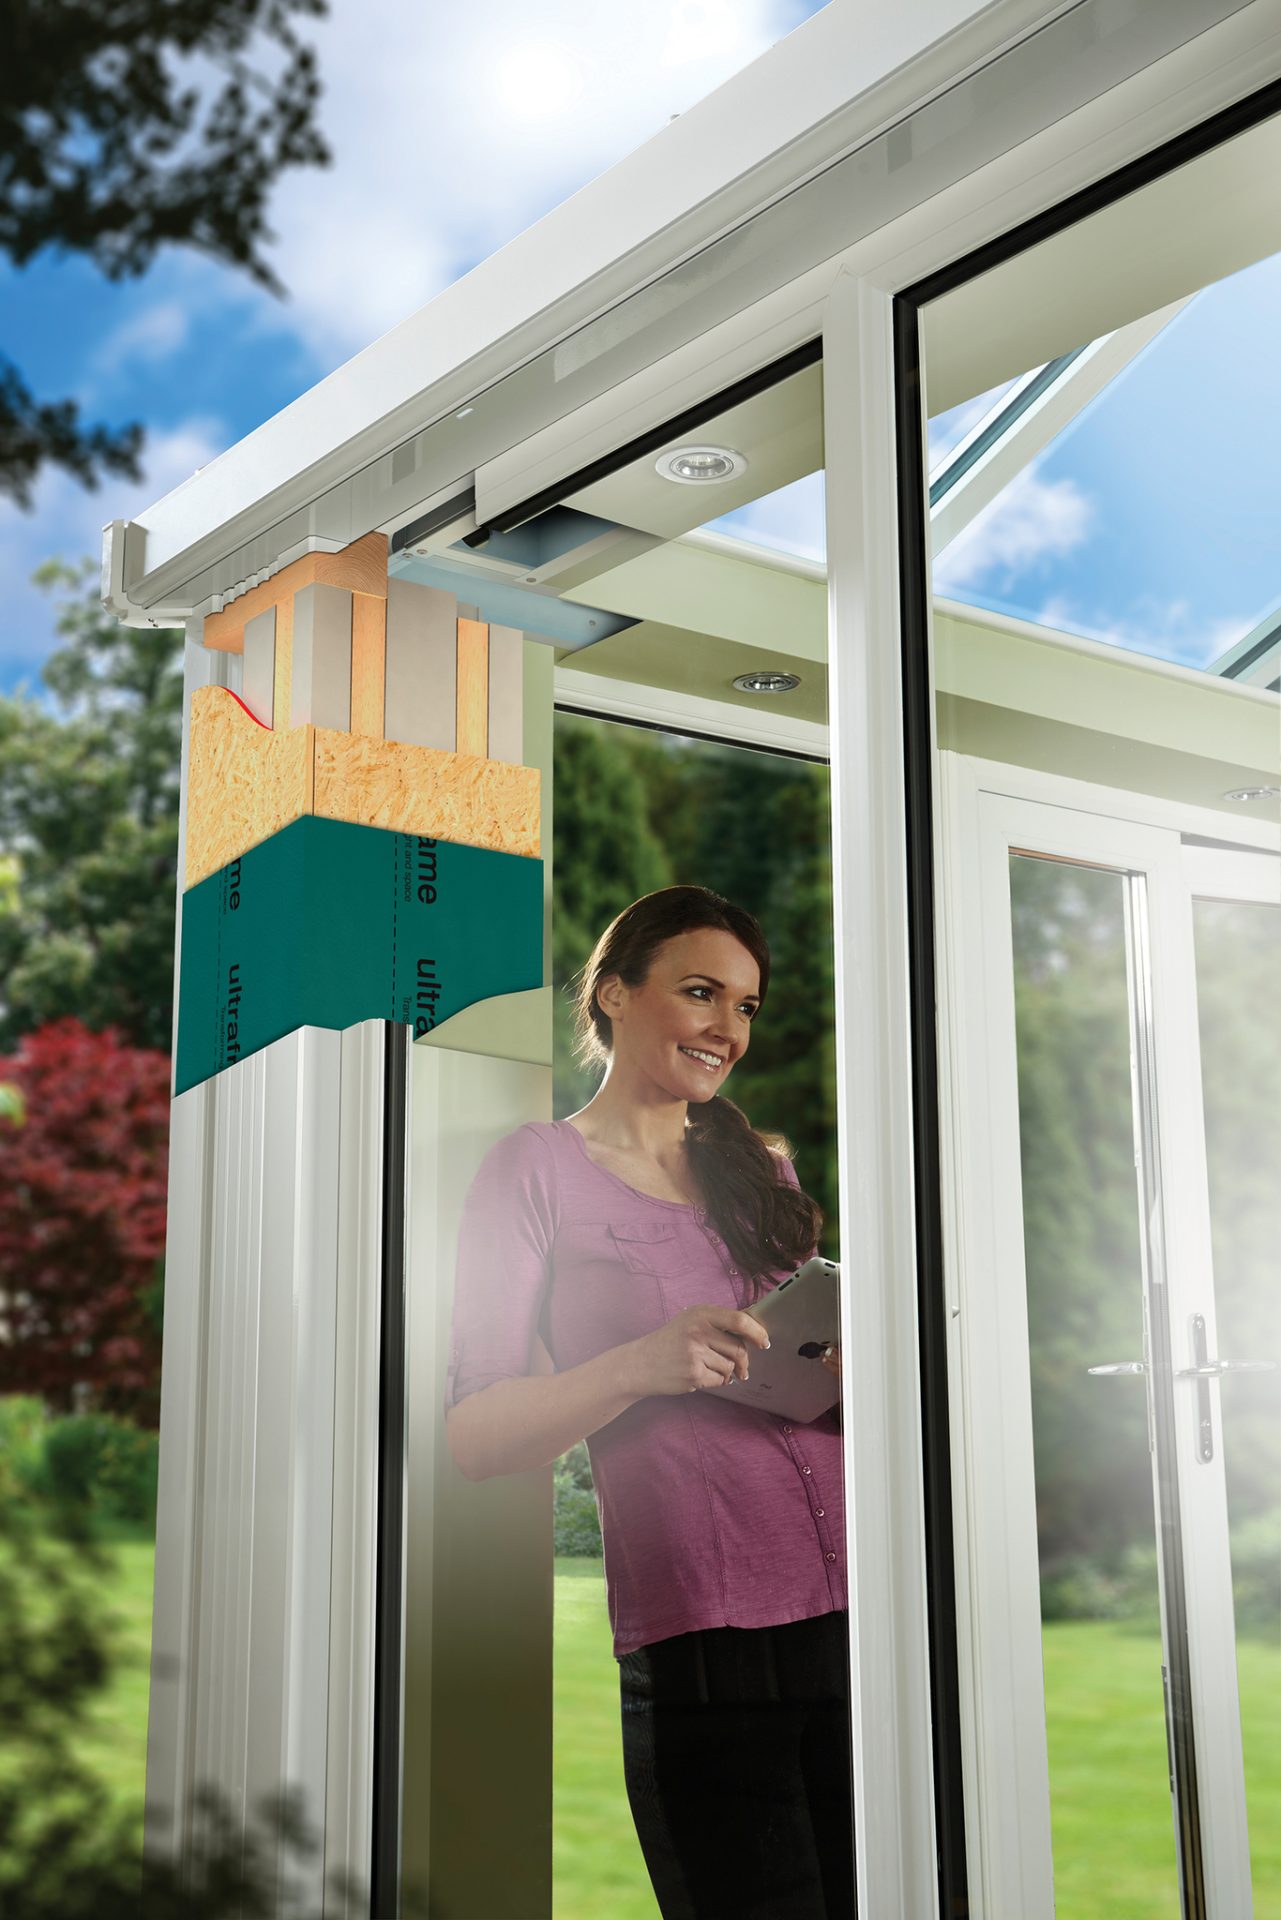 A smiling woman in a purple top stands inside a conservatory with modern white frames, holding a tablet. A cross-section of the conservatory wall reveals layers of insulation and construction materials, highlighting the energy-efficient design